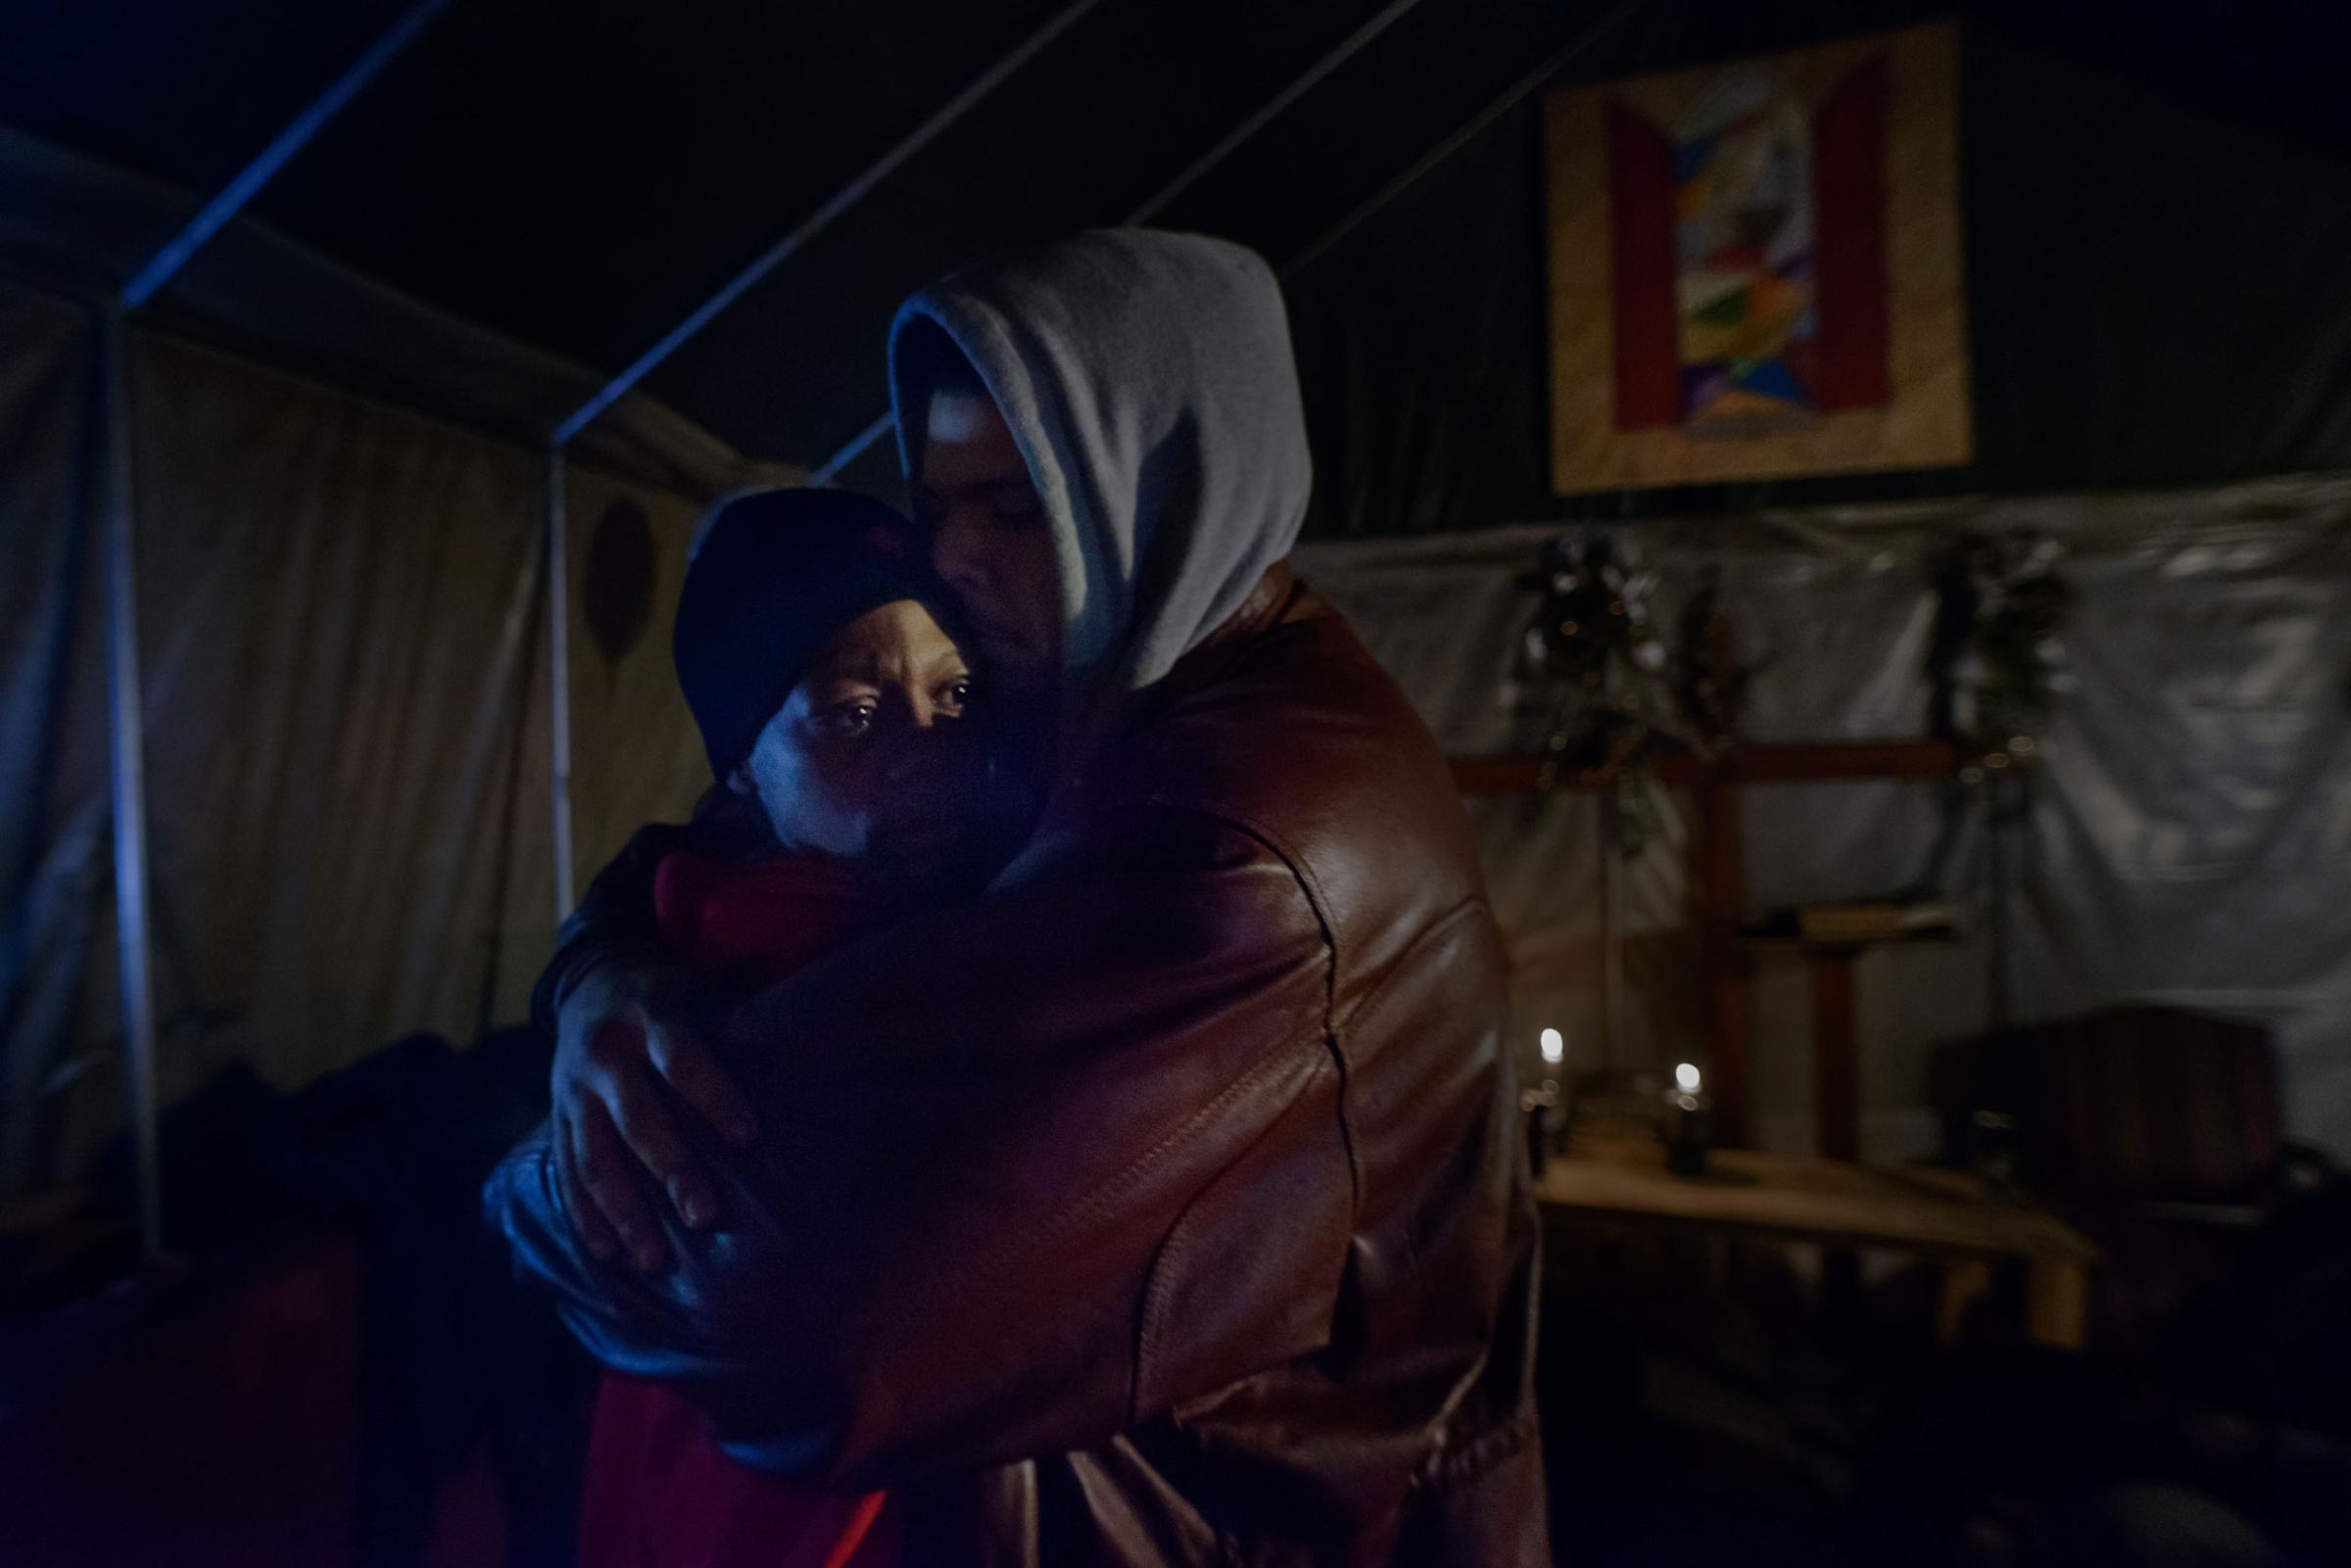 14  March  2014 - Tent City, Lakewood, New Jersey - Inside Tent City's chapel, Chris consoles his wife Eve after an argument.